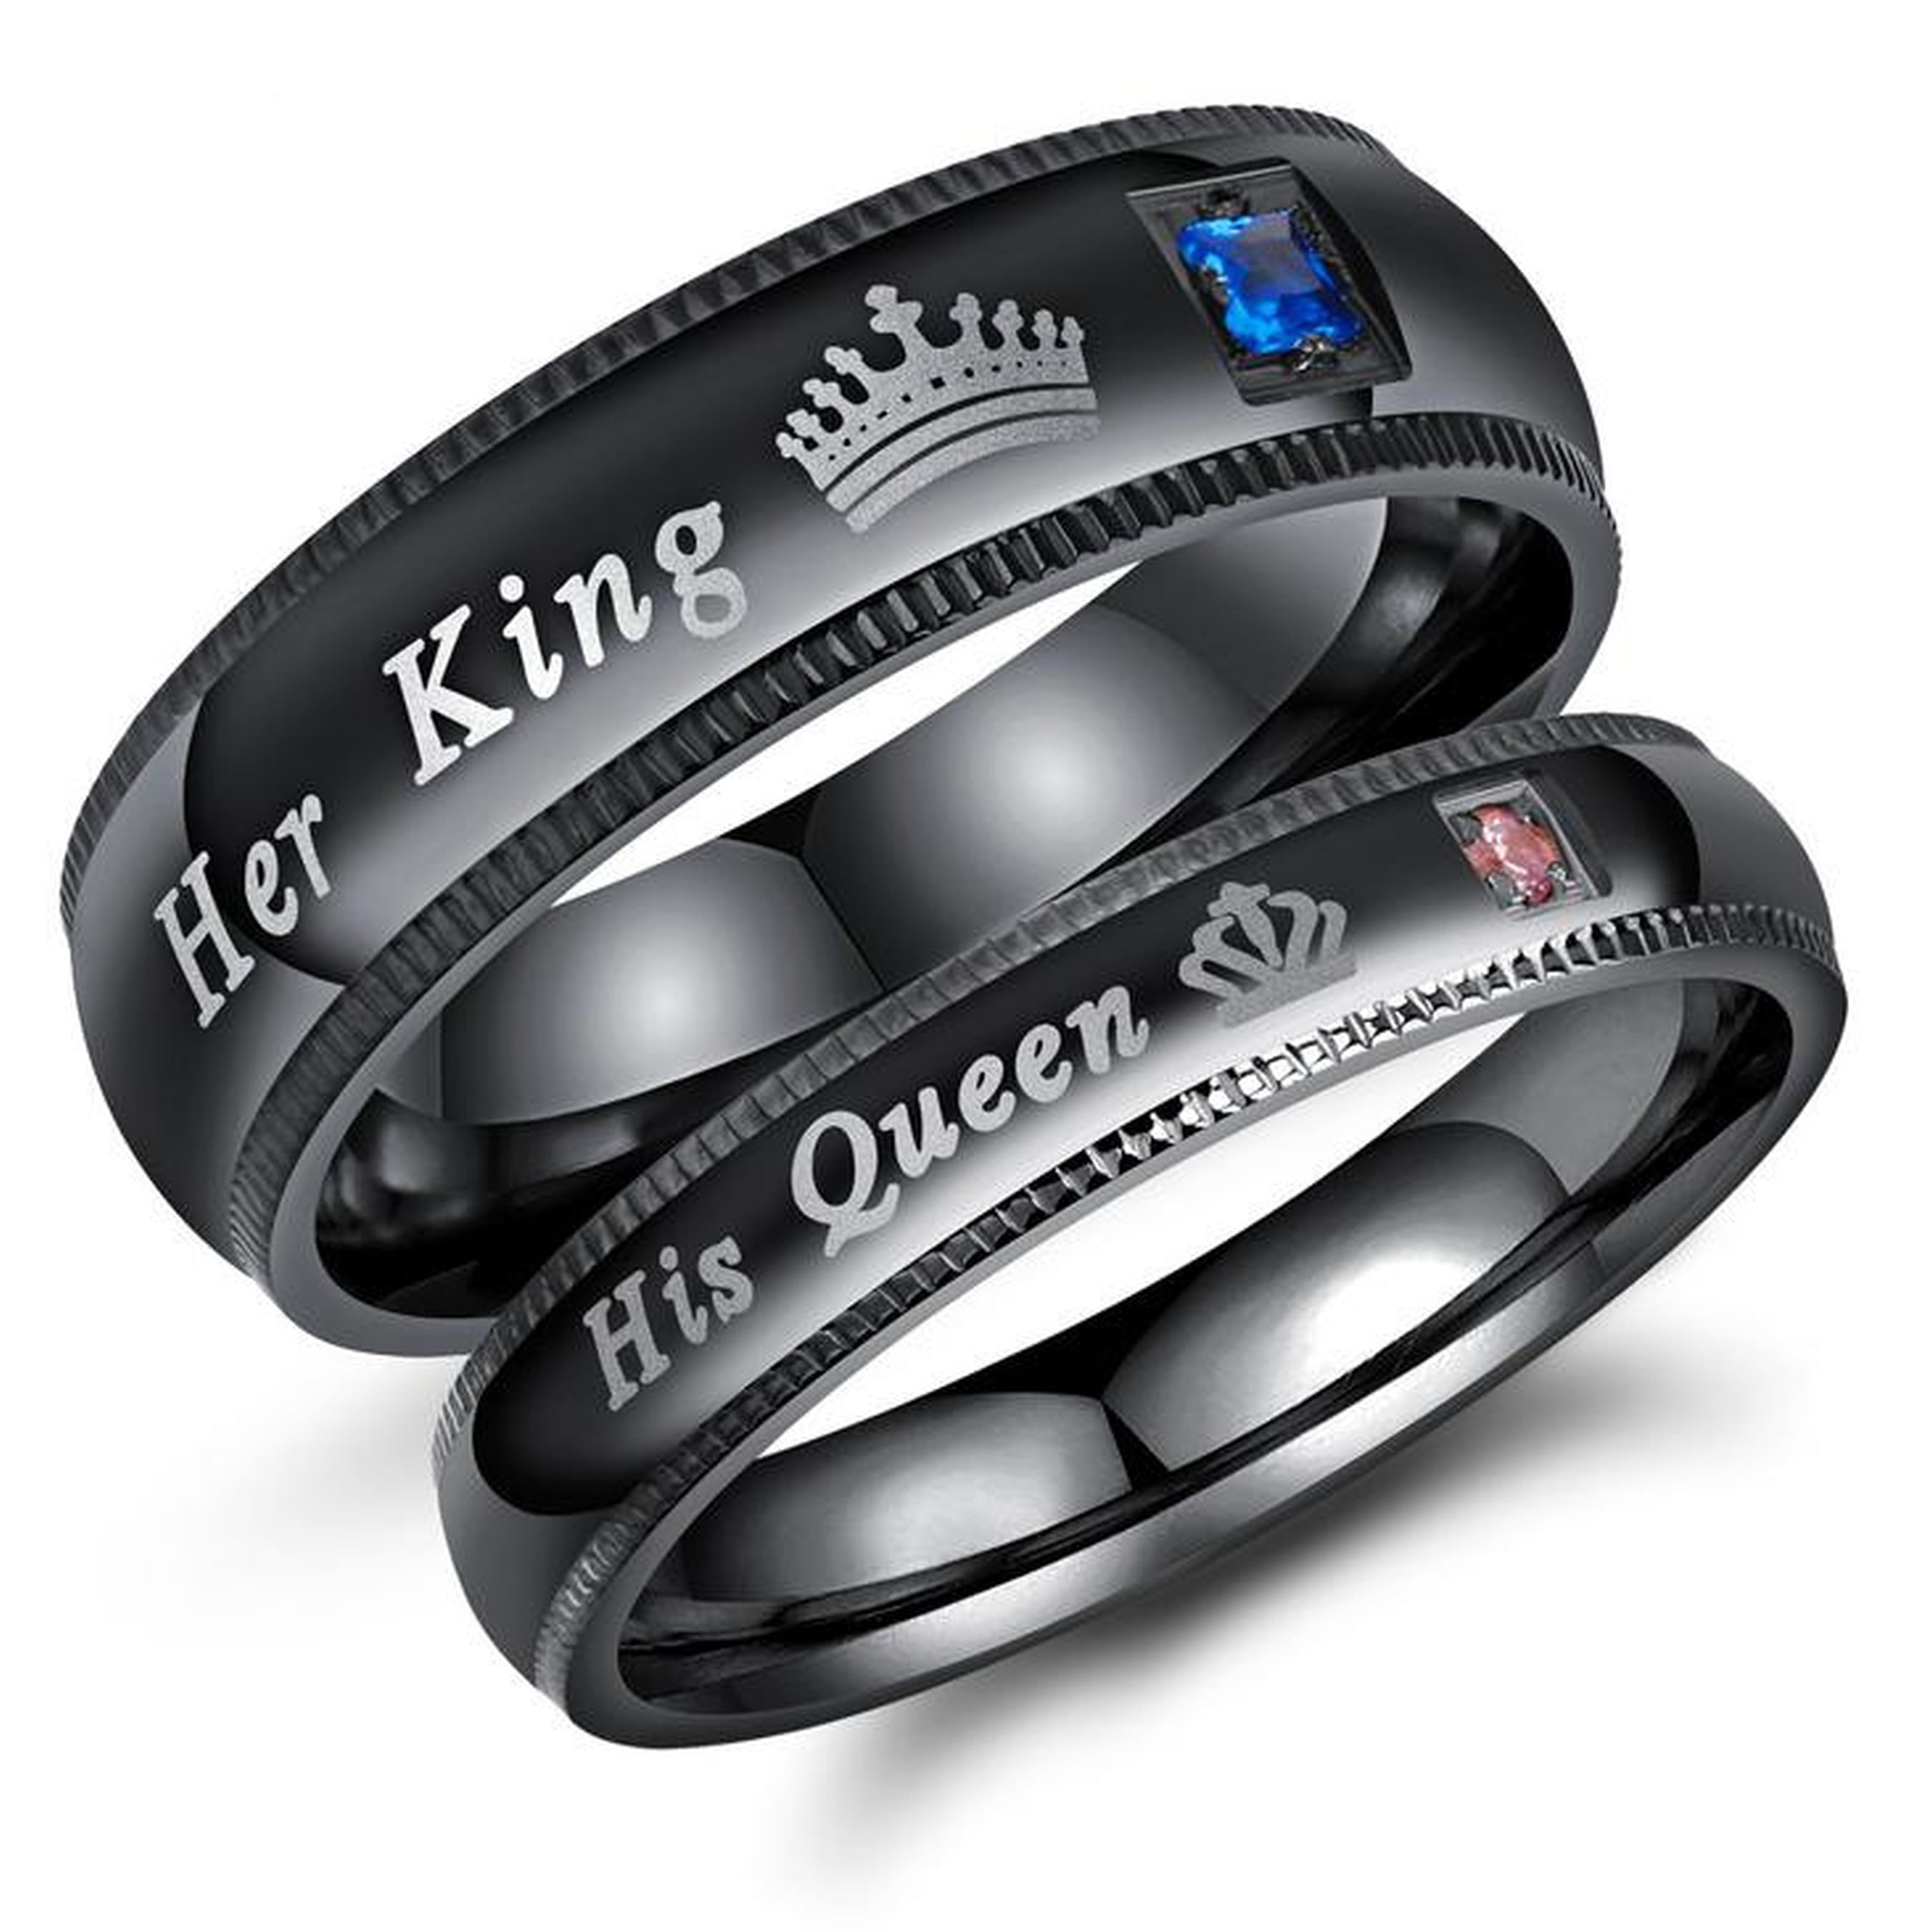 King and Queen Rings Classic Dome Titanium Wedding Rings Personalized Gold Plated Titanium Ring Promise Ring,Anniversary Ring Set